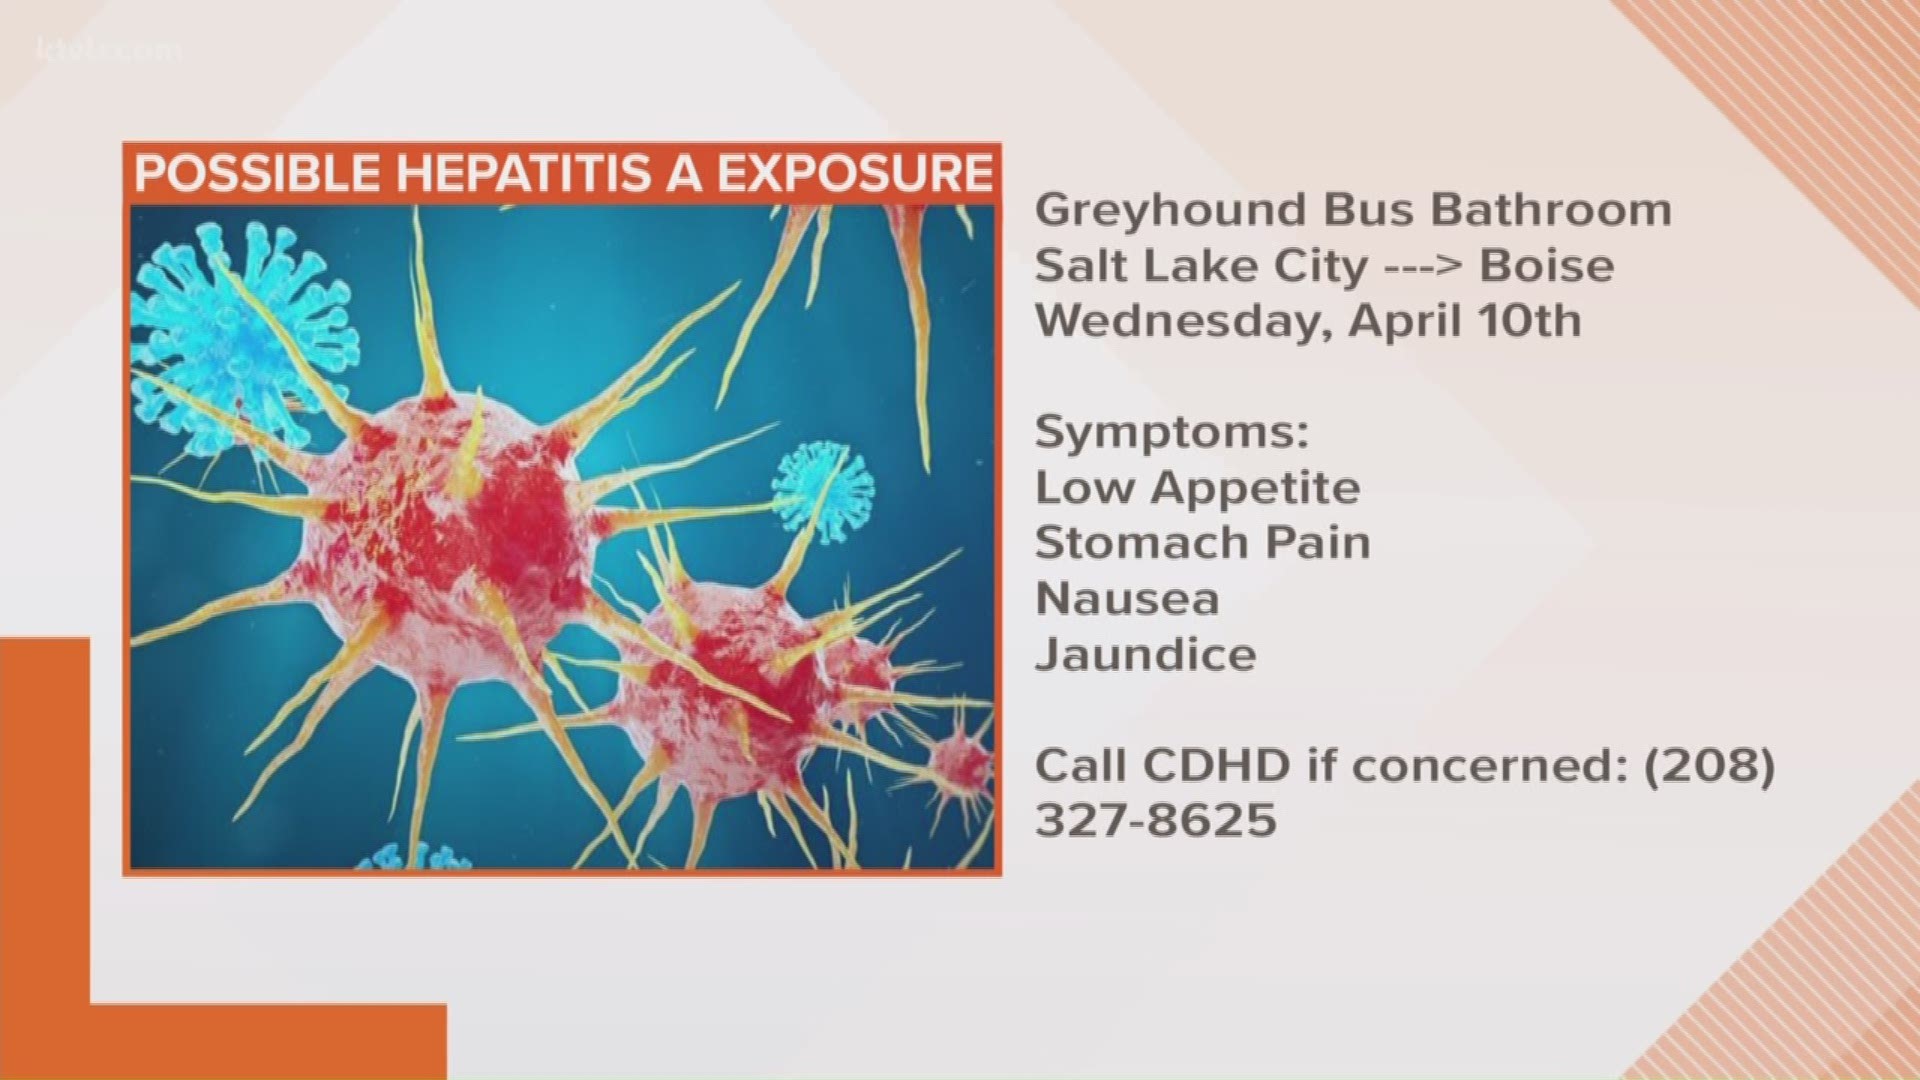 The possible exposure happened on a Greyhound bus from Salt Lake City to Boise last week.